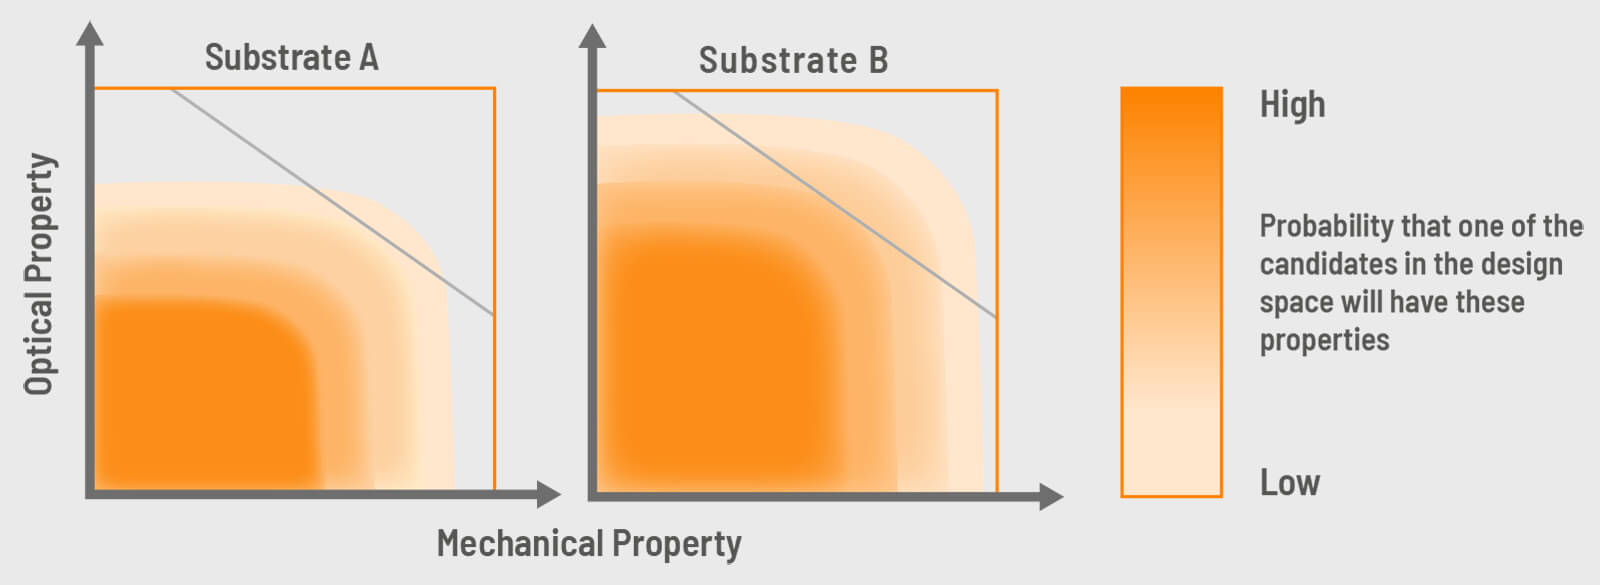 design space visualization for materials on two substrates